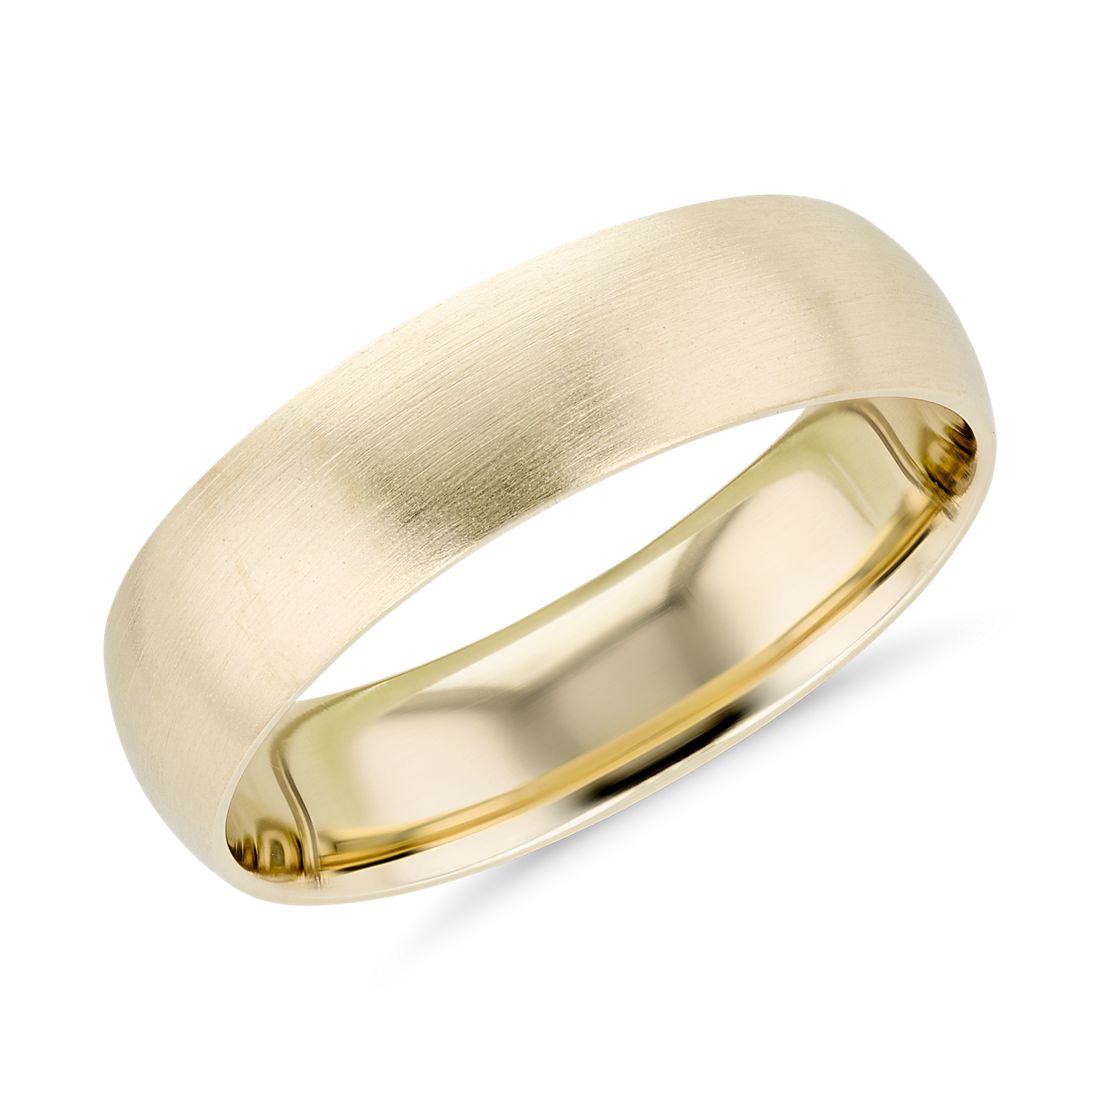 Matte Mid-weight Comfort Fit Wedding Ring in 14k Yellow Gold (6 mm)